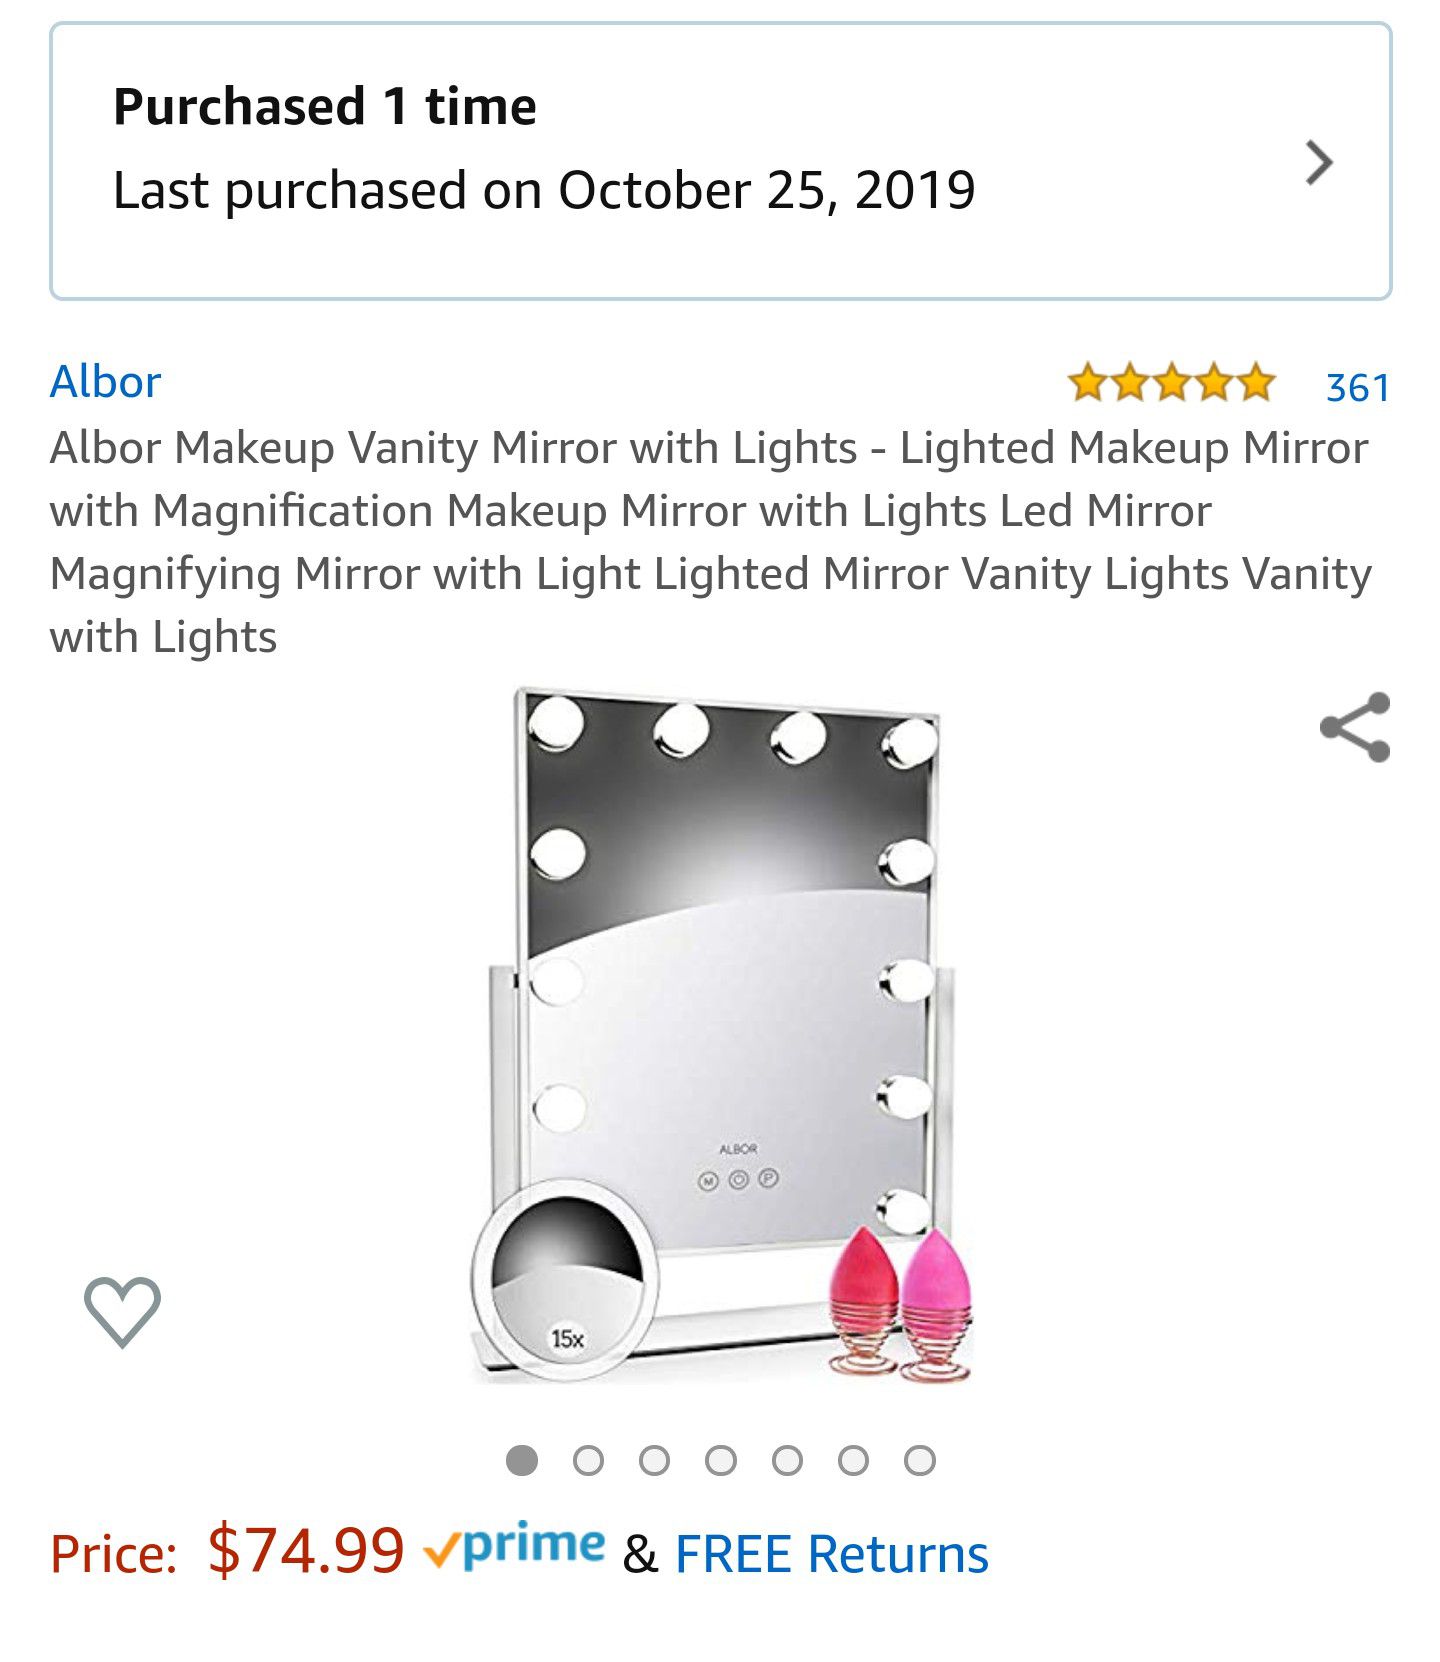 Brand new Makeup Vanity Mirror with LED lights